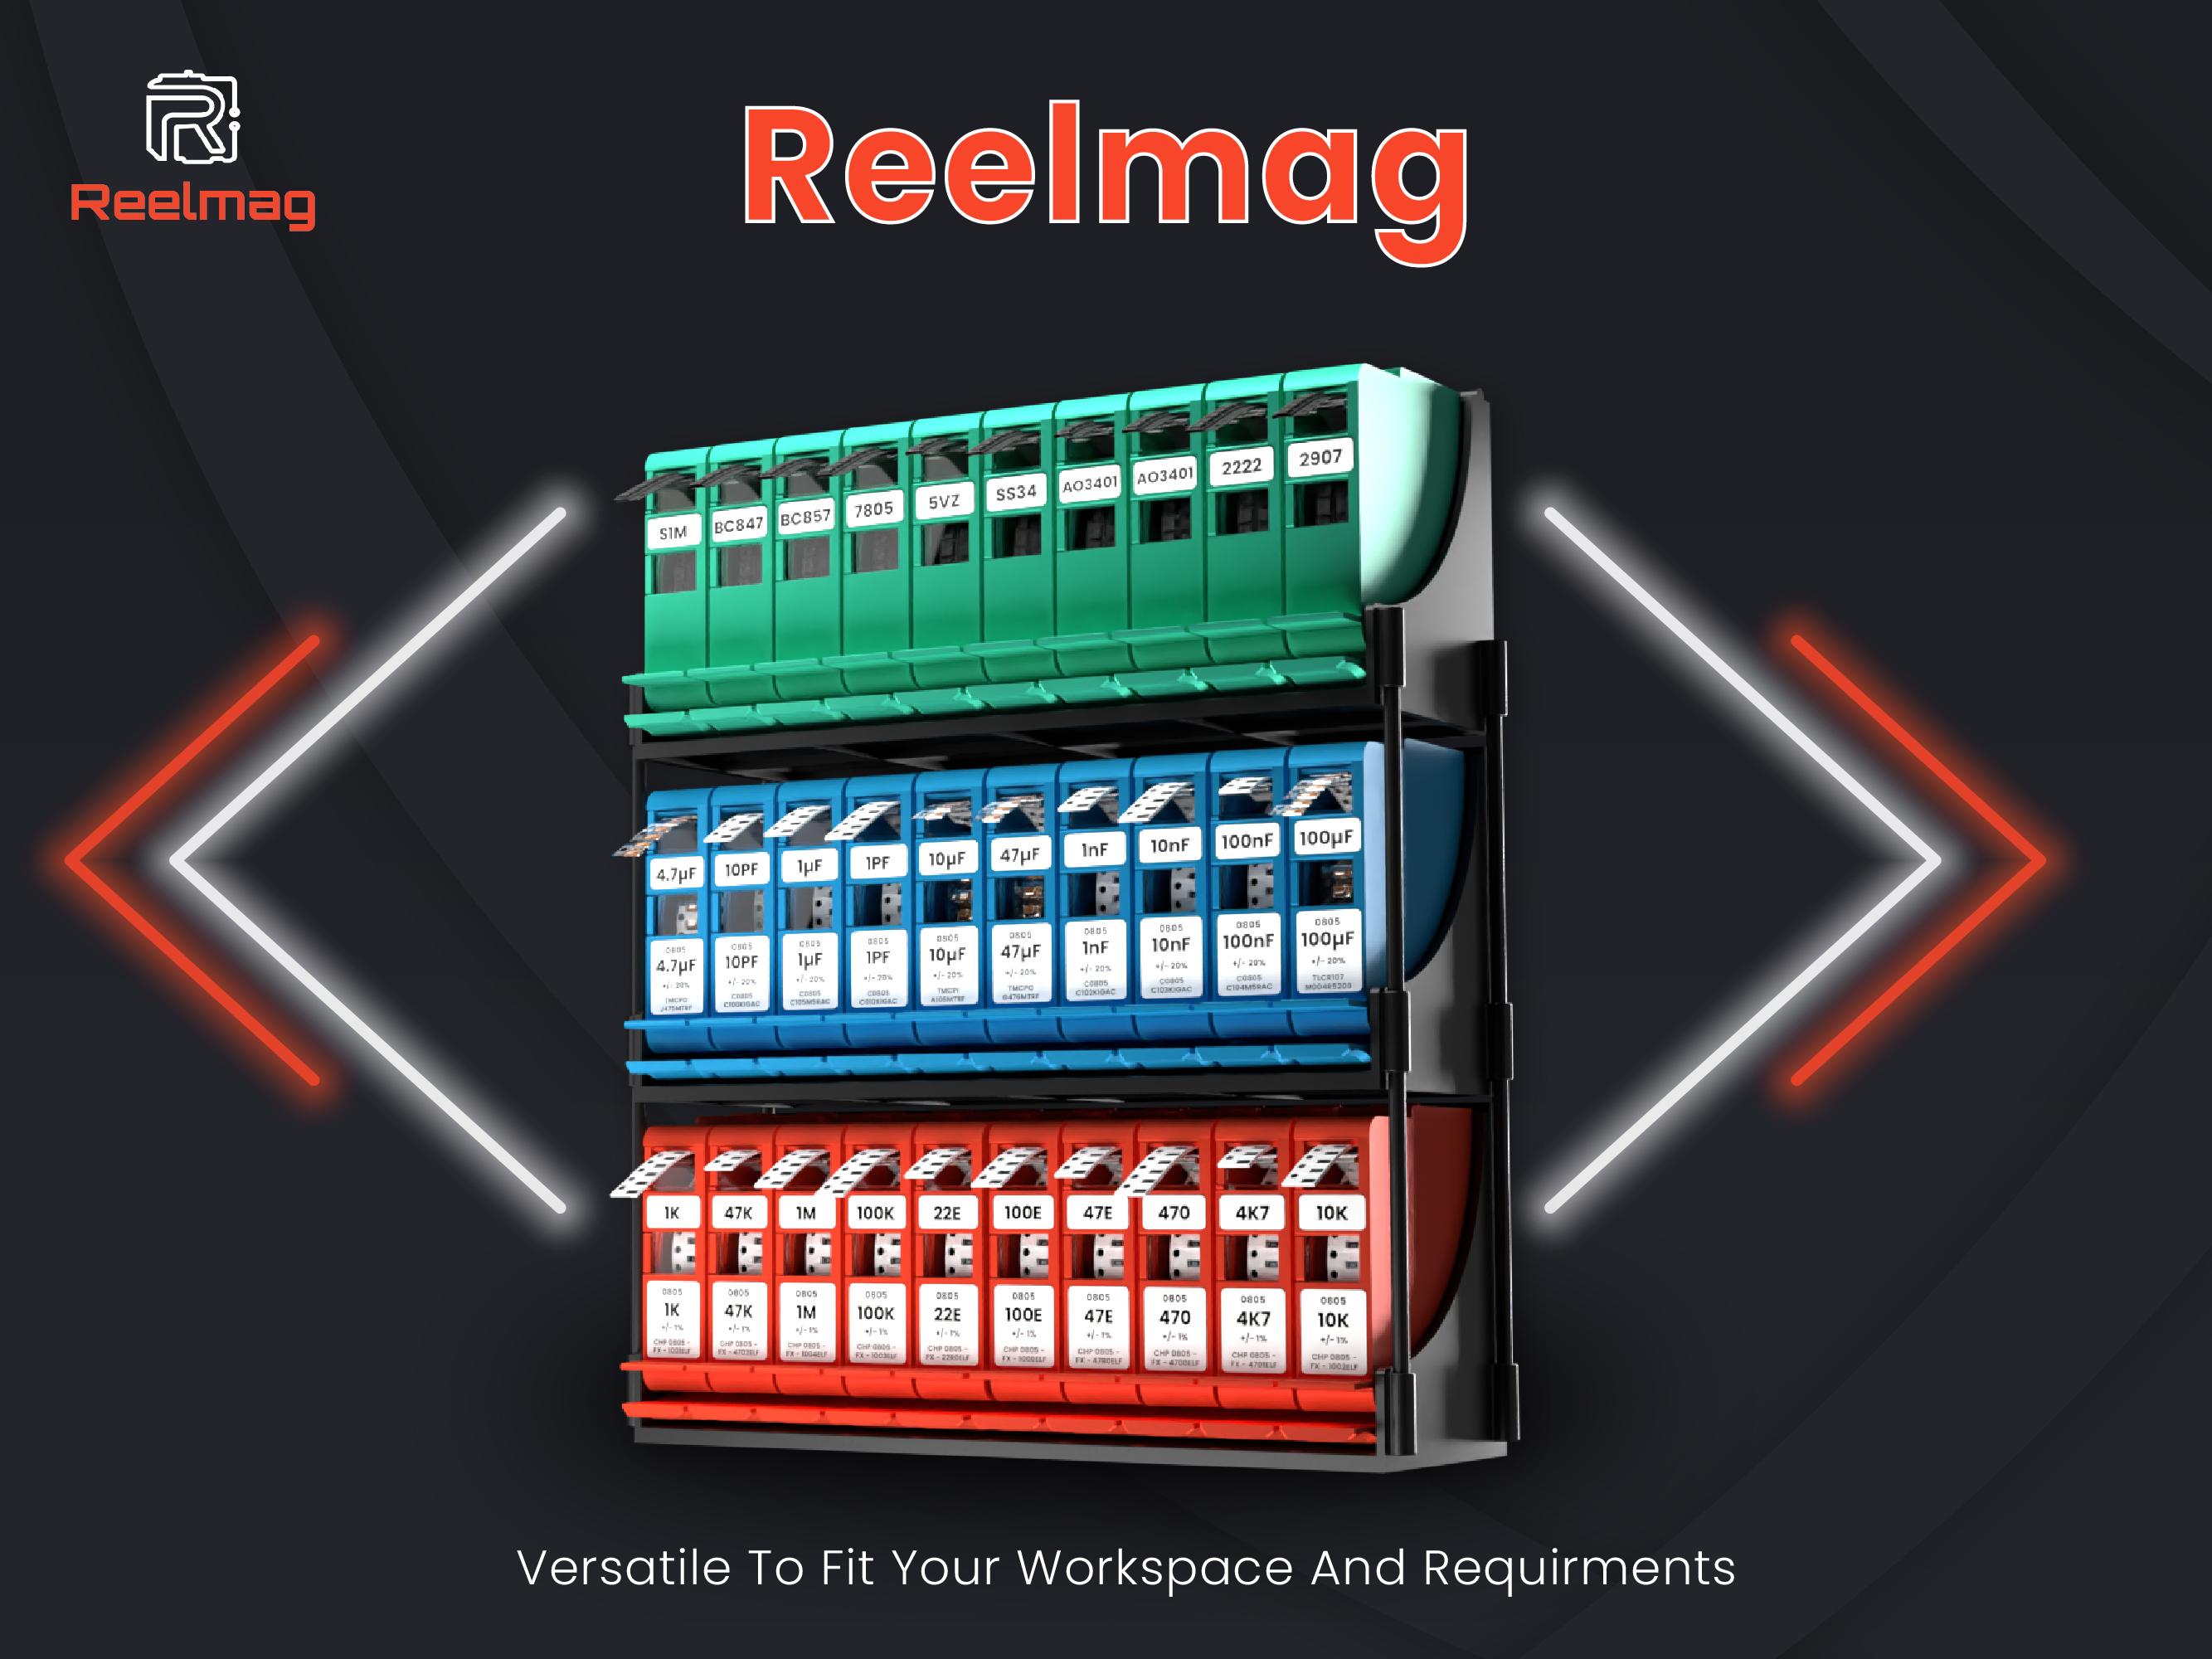 reelmag-an-easier-way-to-store-and-organize-your-smd-components